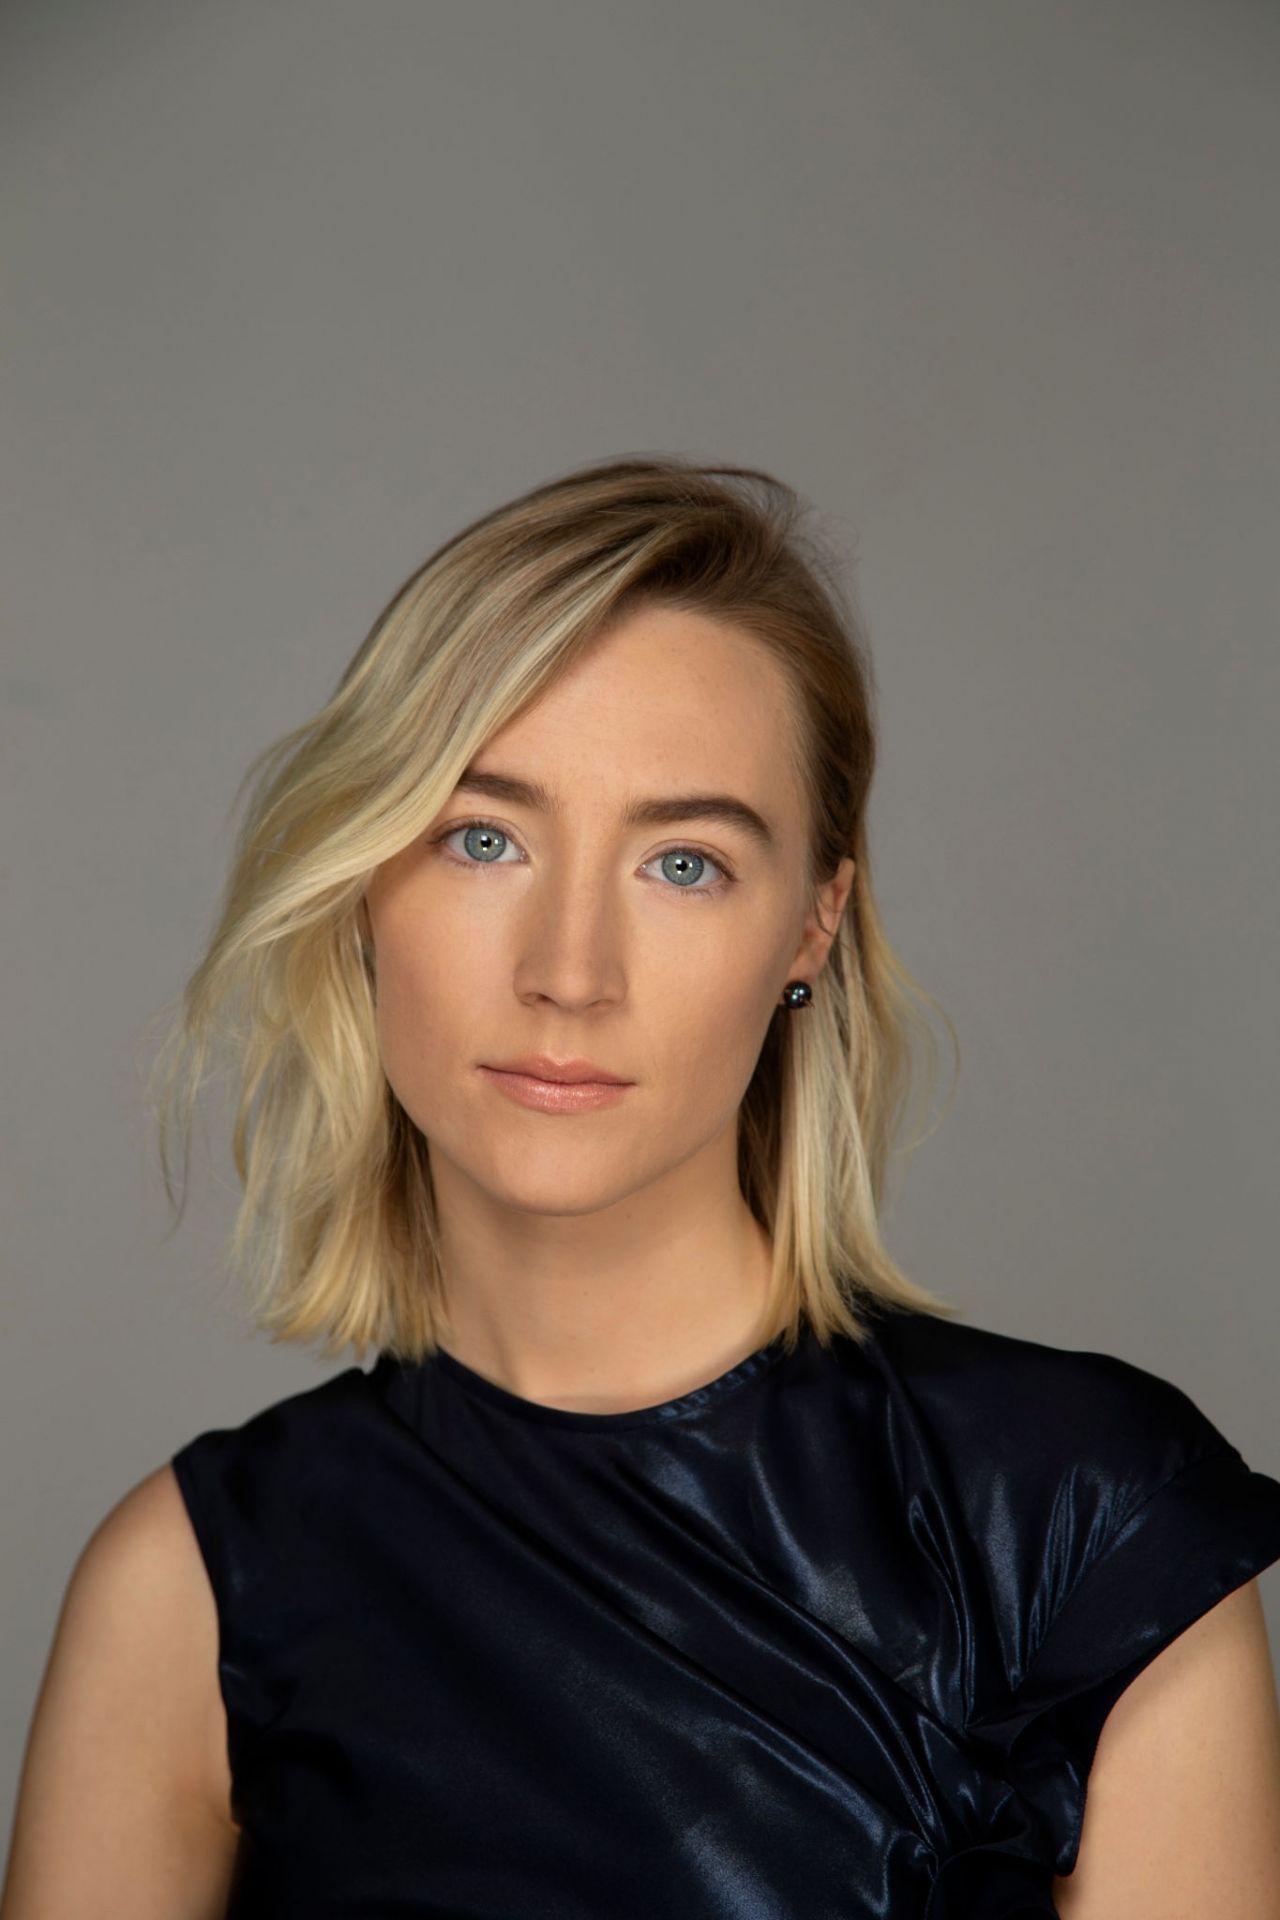 saoirse-ronan-photoshoot-for-la-times-actresses-roundtable-december-2018-2.jpg